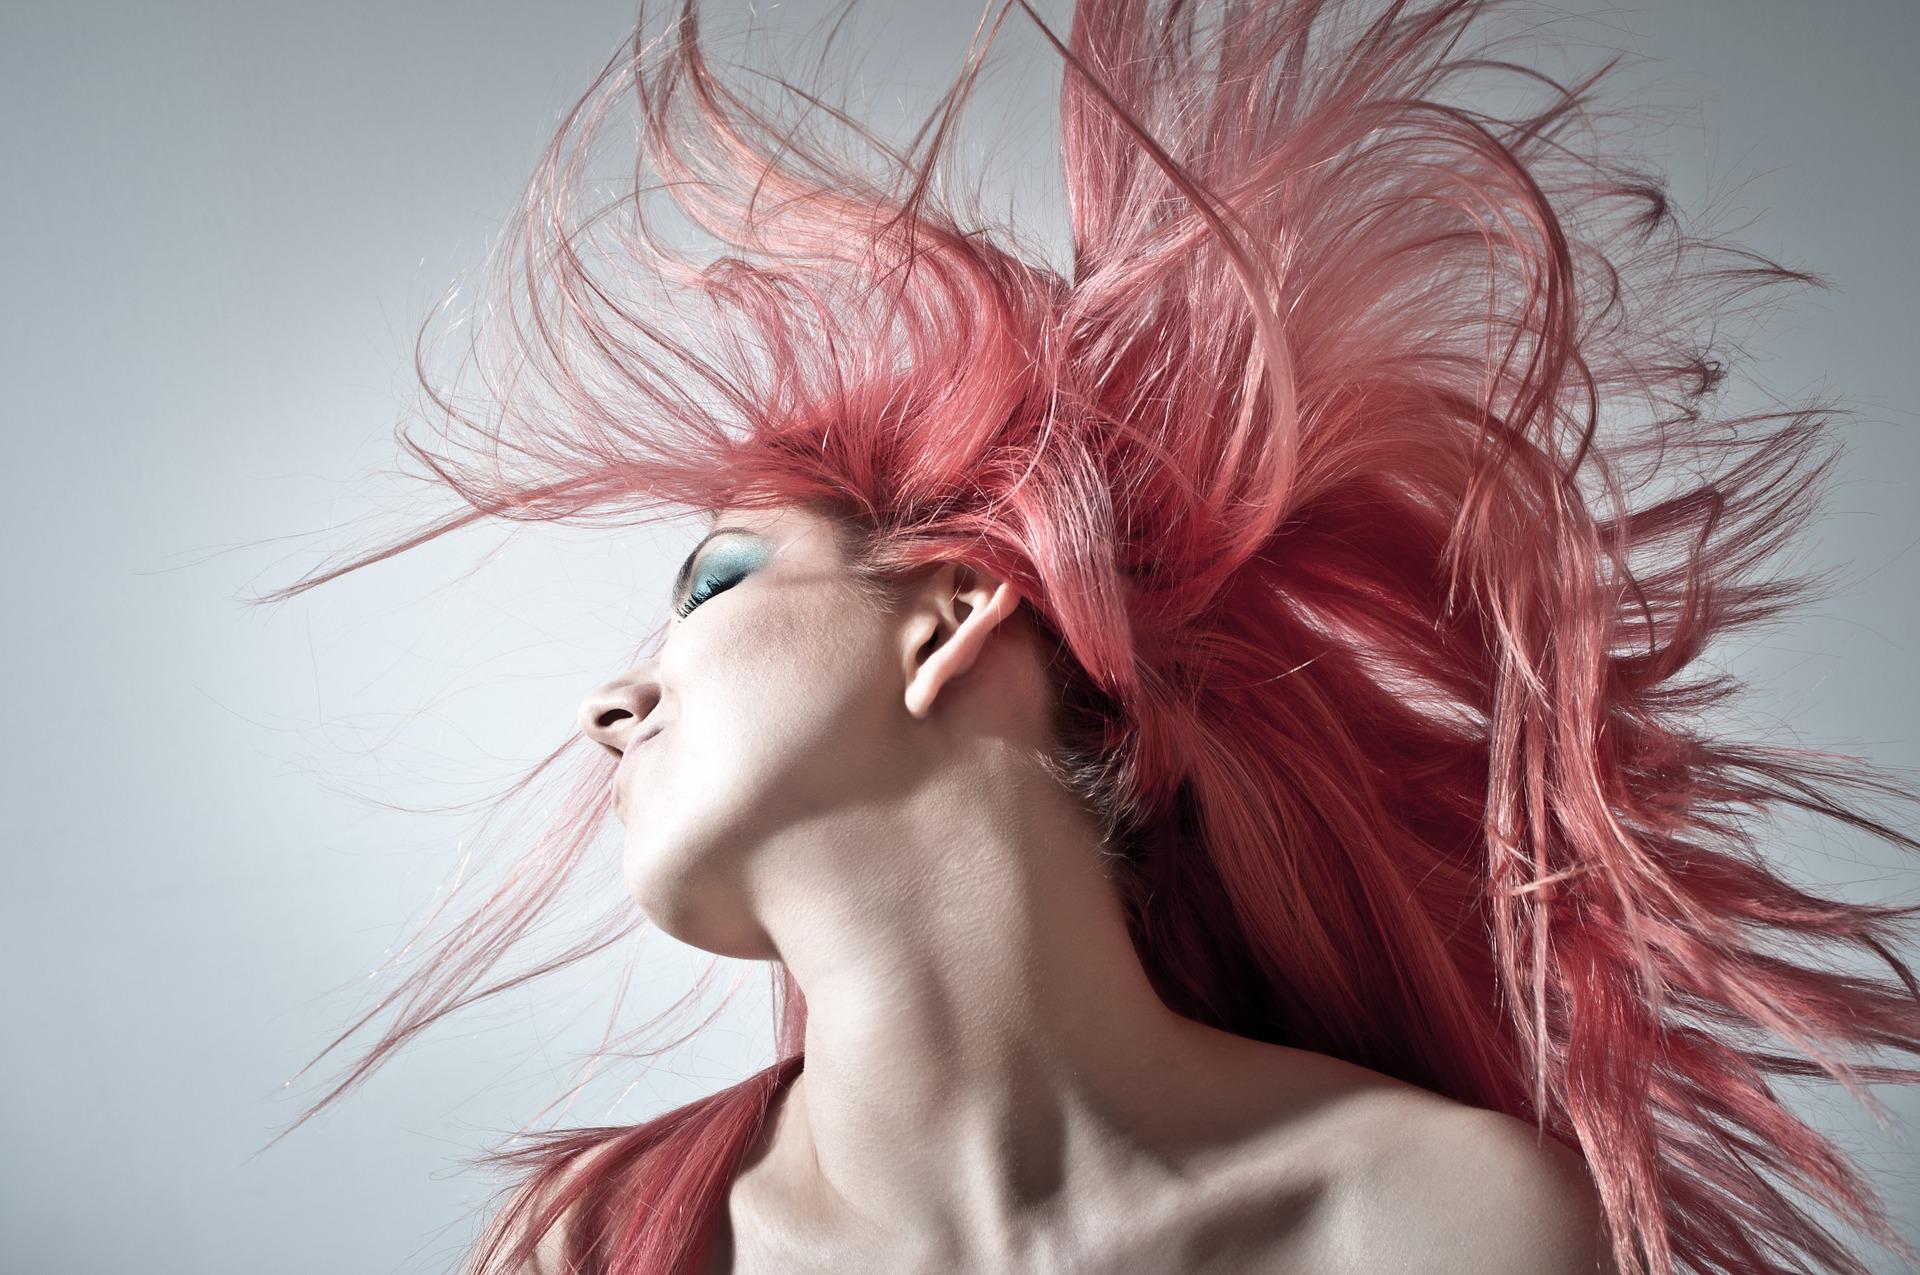 How To Choose A New Permanent Hair Colour: Factors To Consider